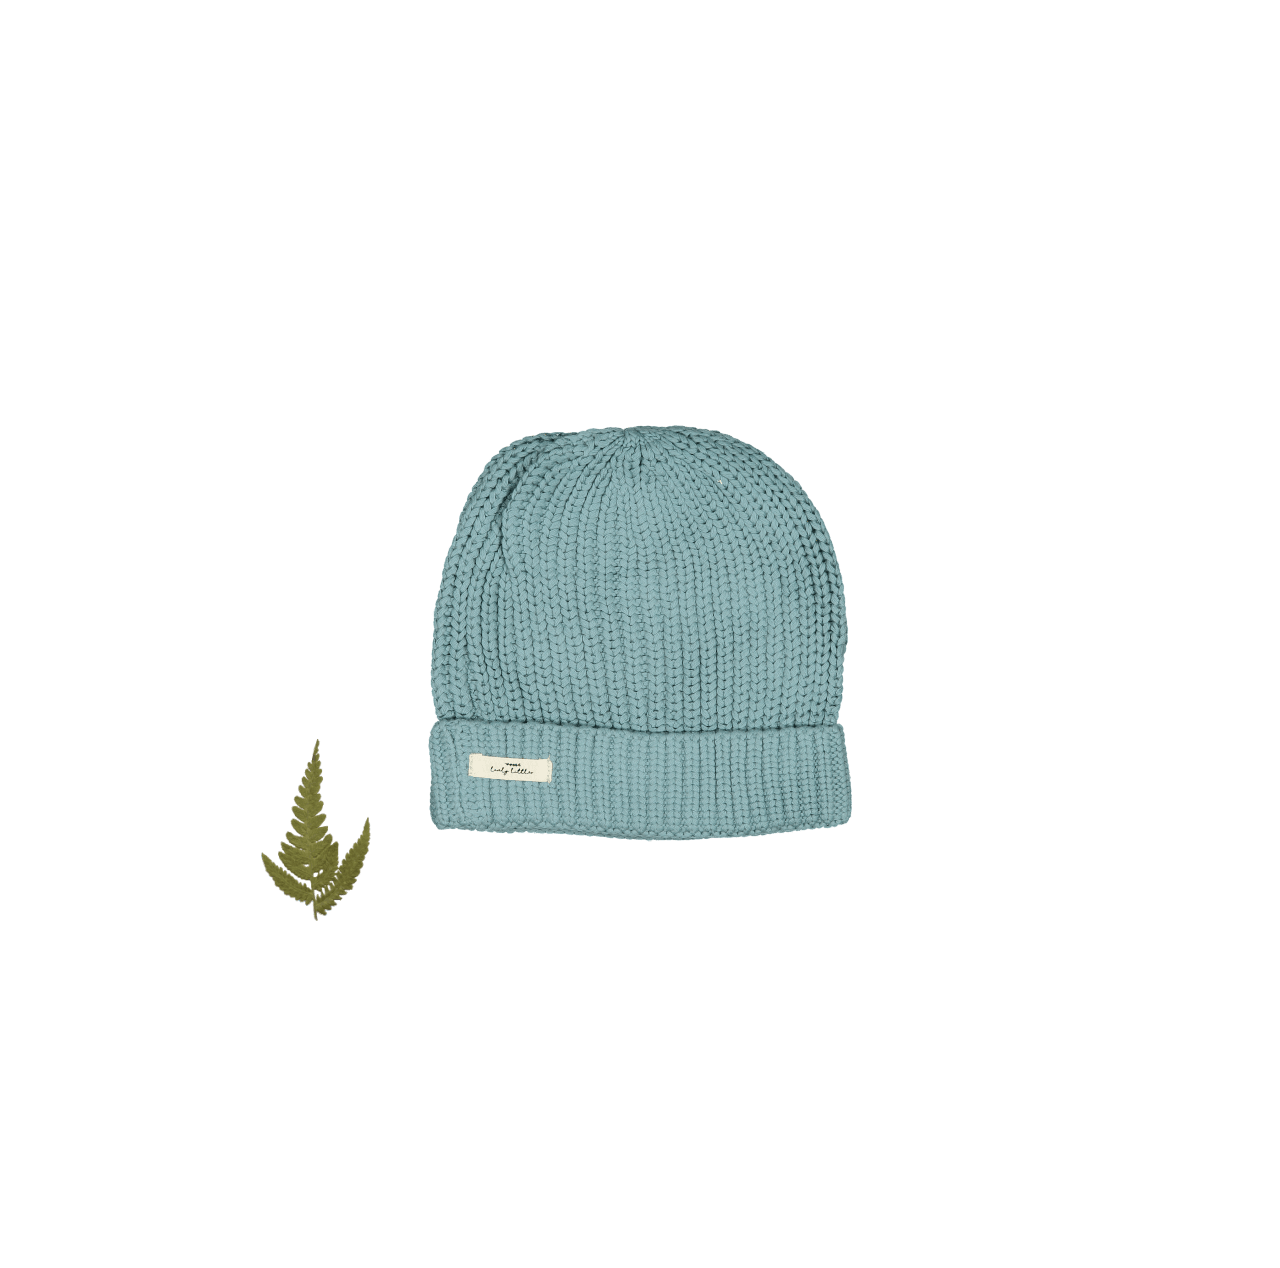 The Chunky Knit Hat - Ocean